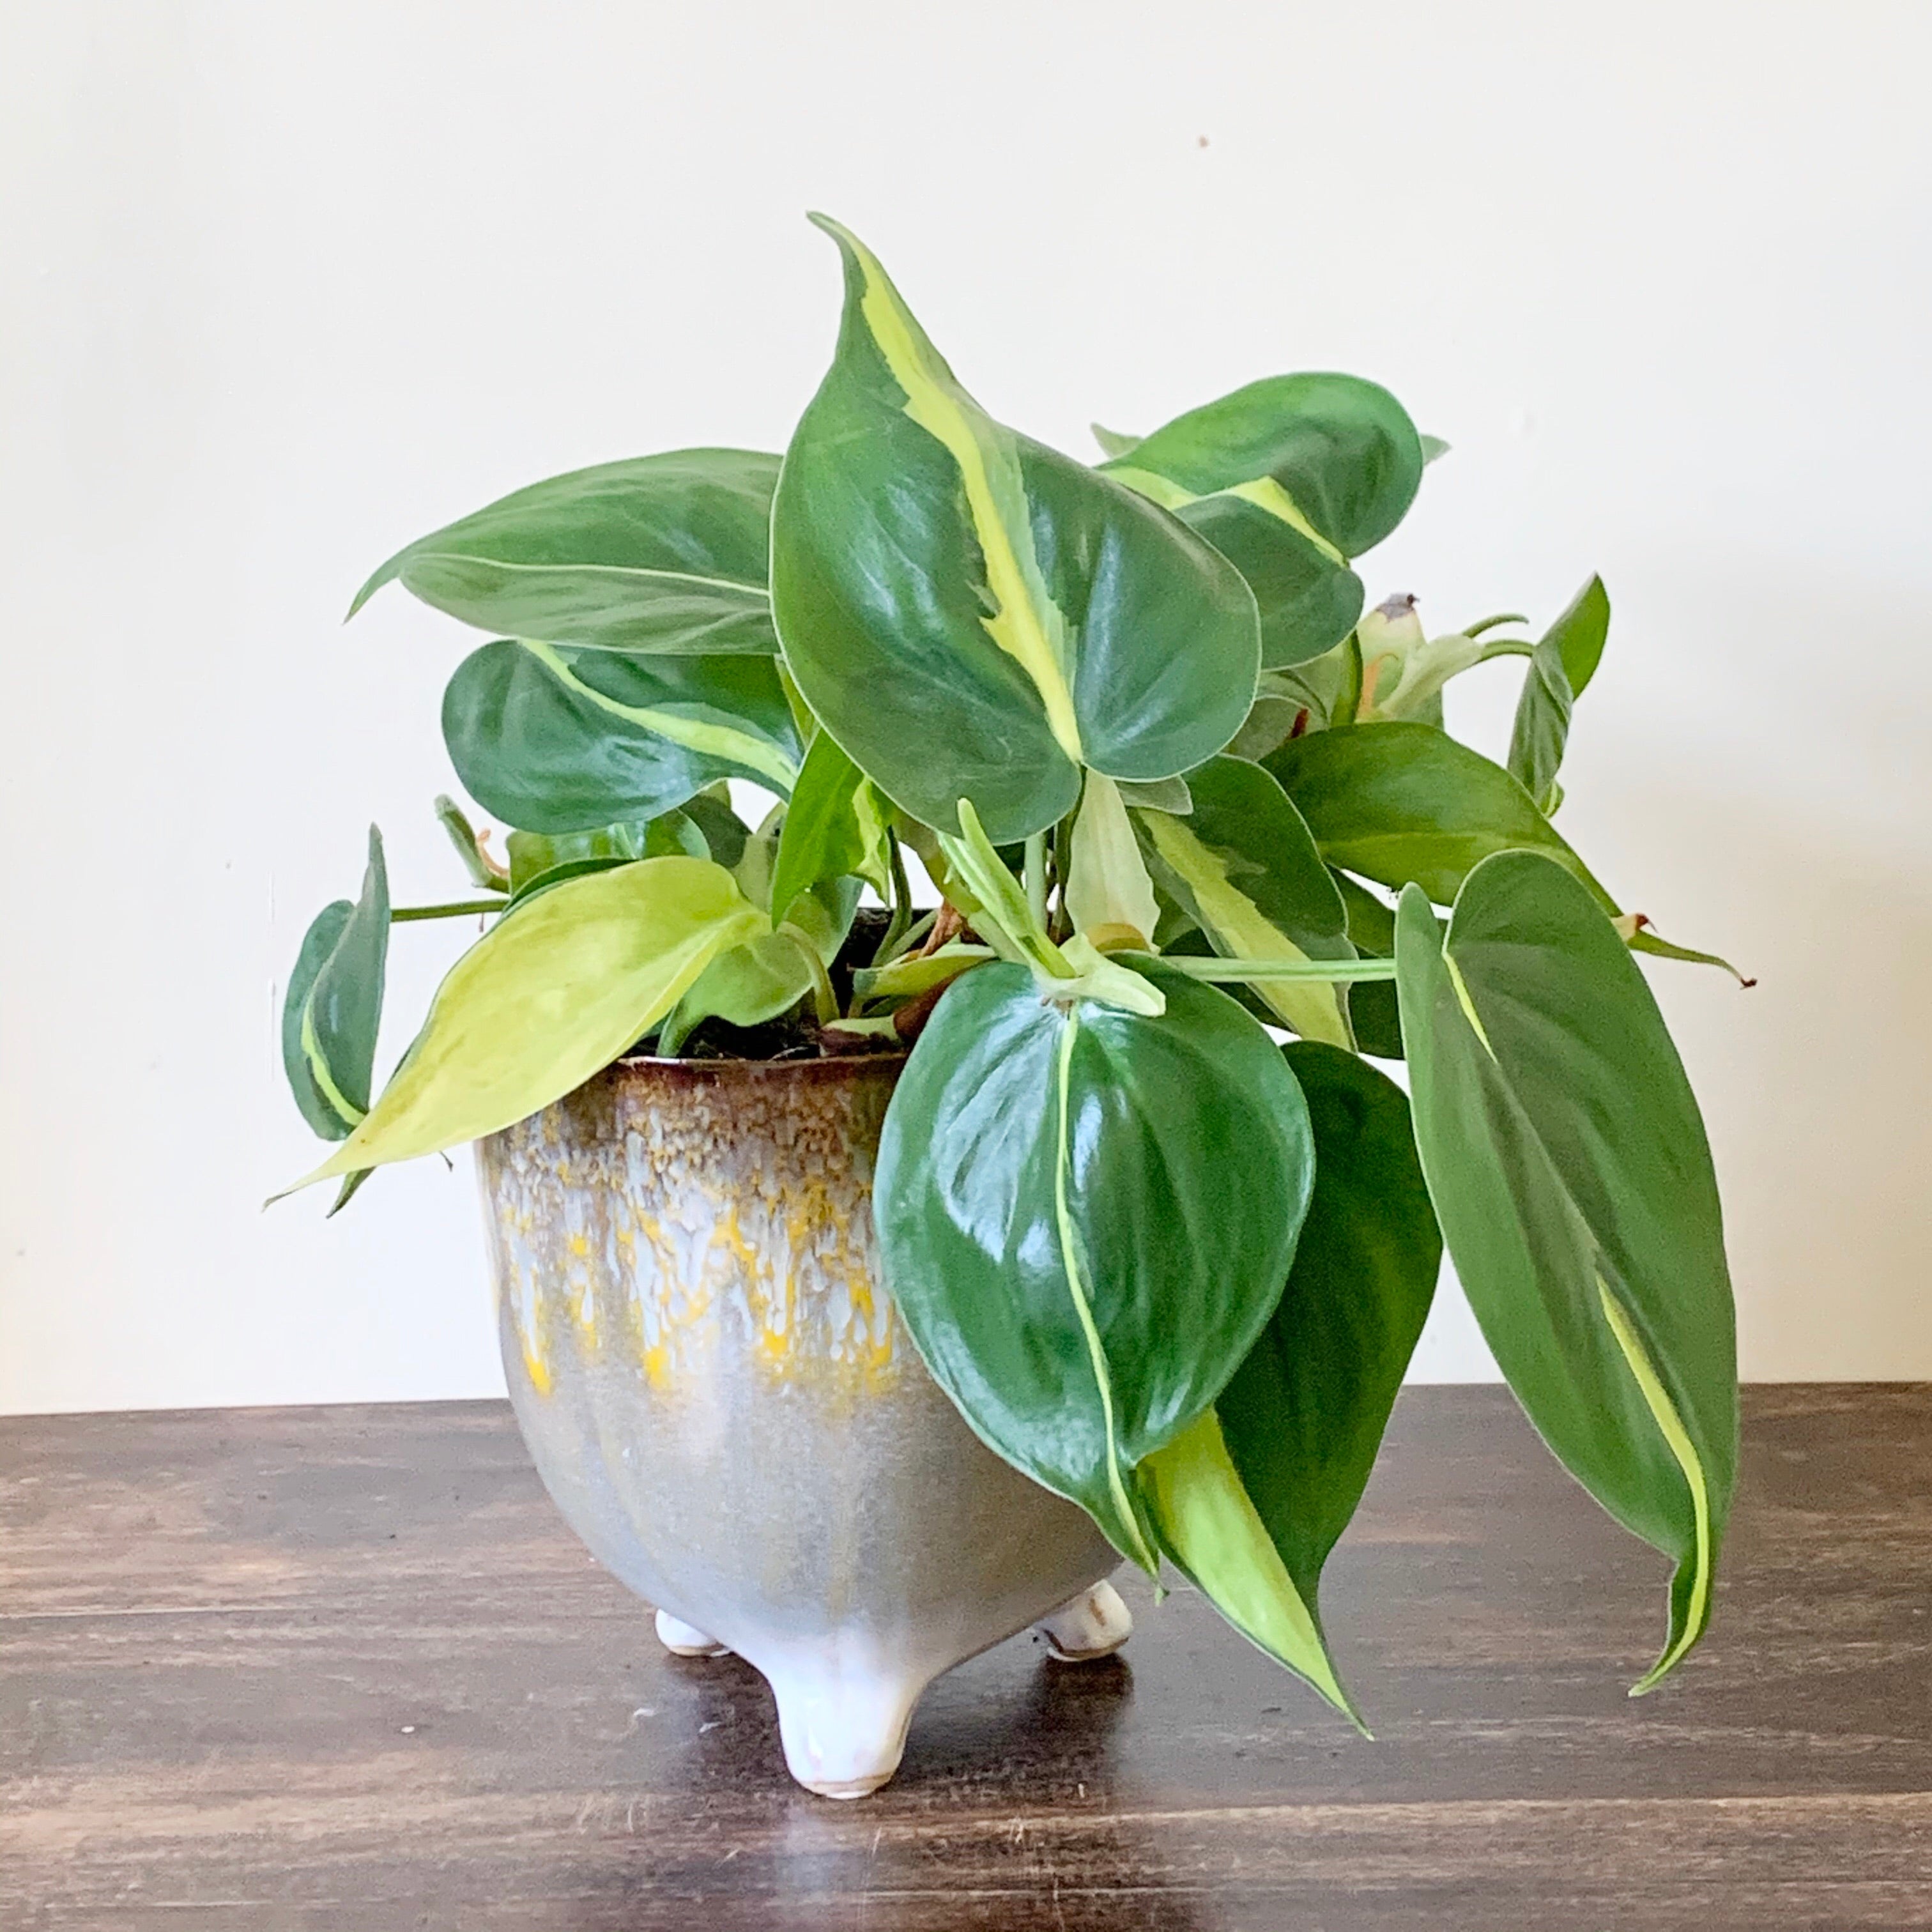 Sweetheart Plant - Philodendron scandens Brasil